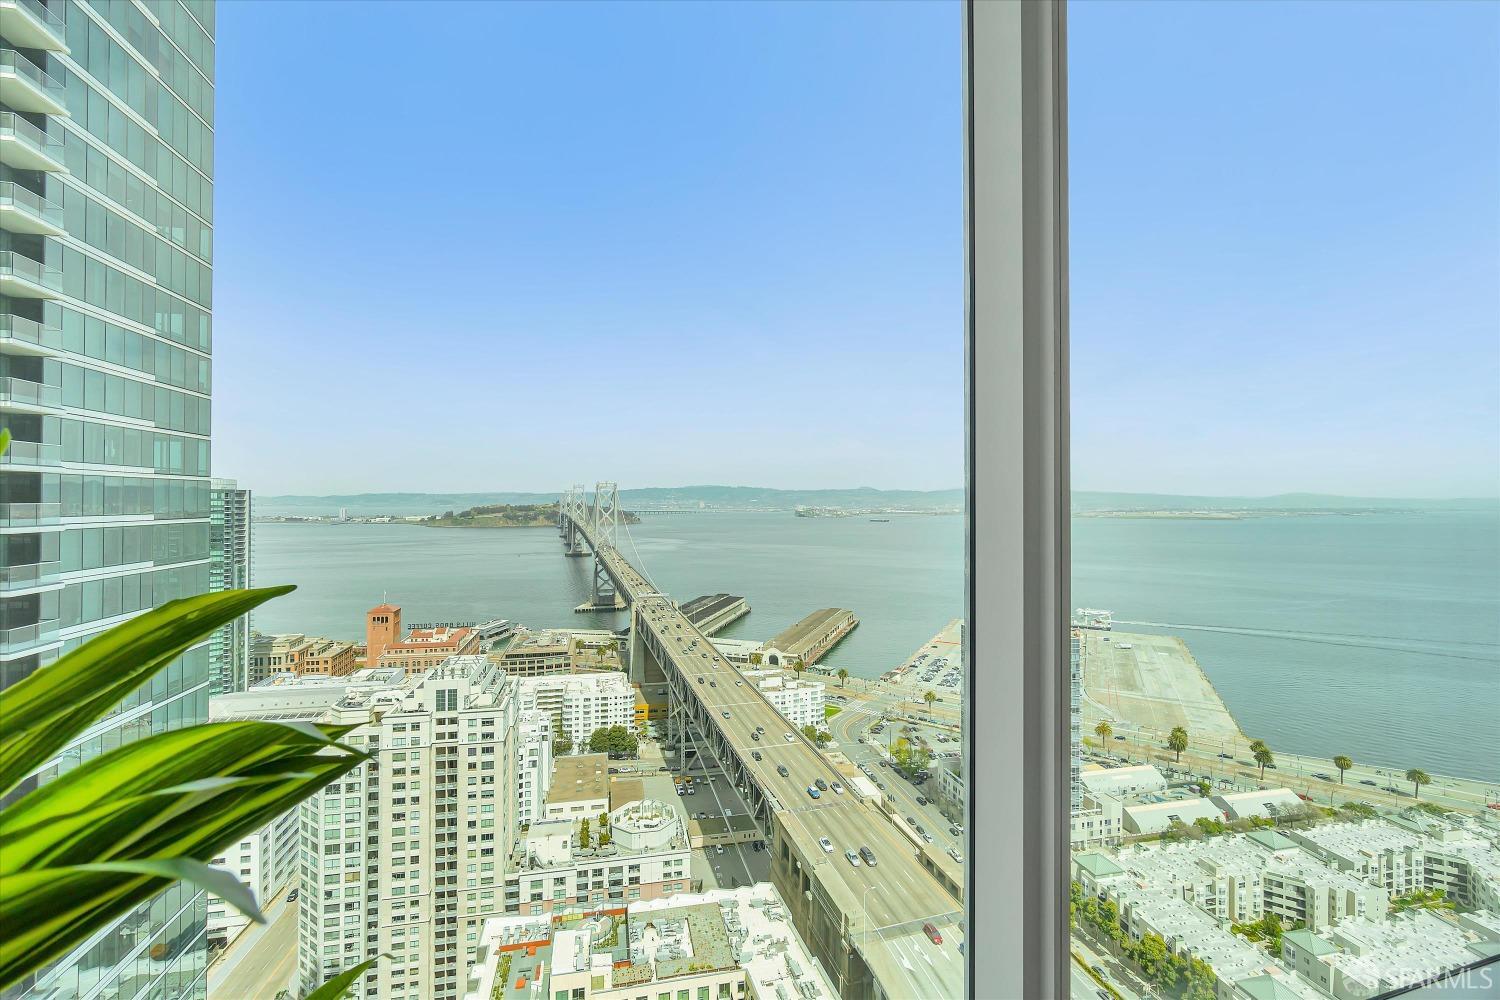 Photo of 425 1st St #3401 in San Francisco, CA